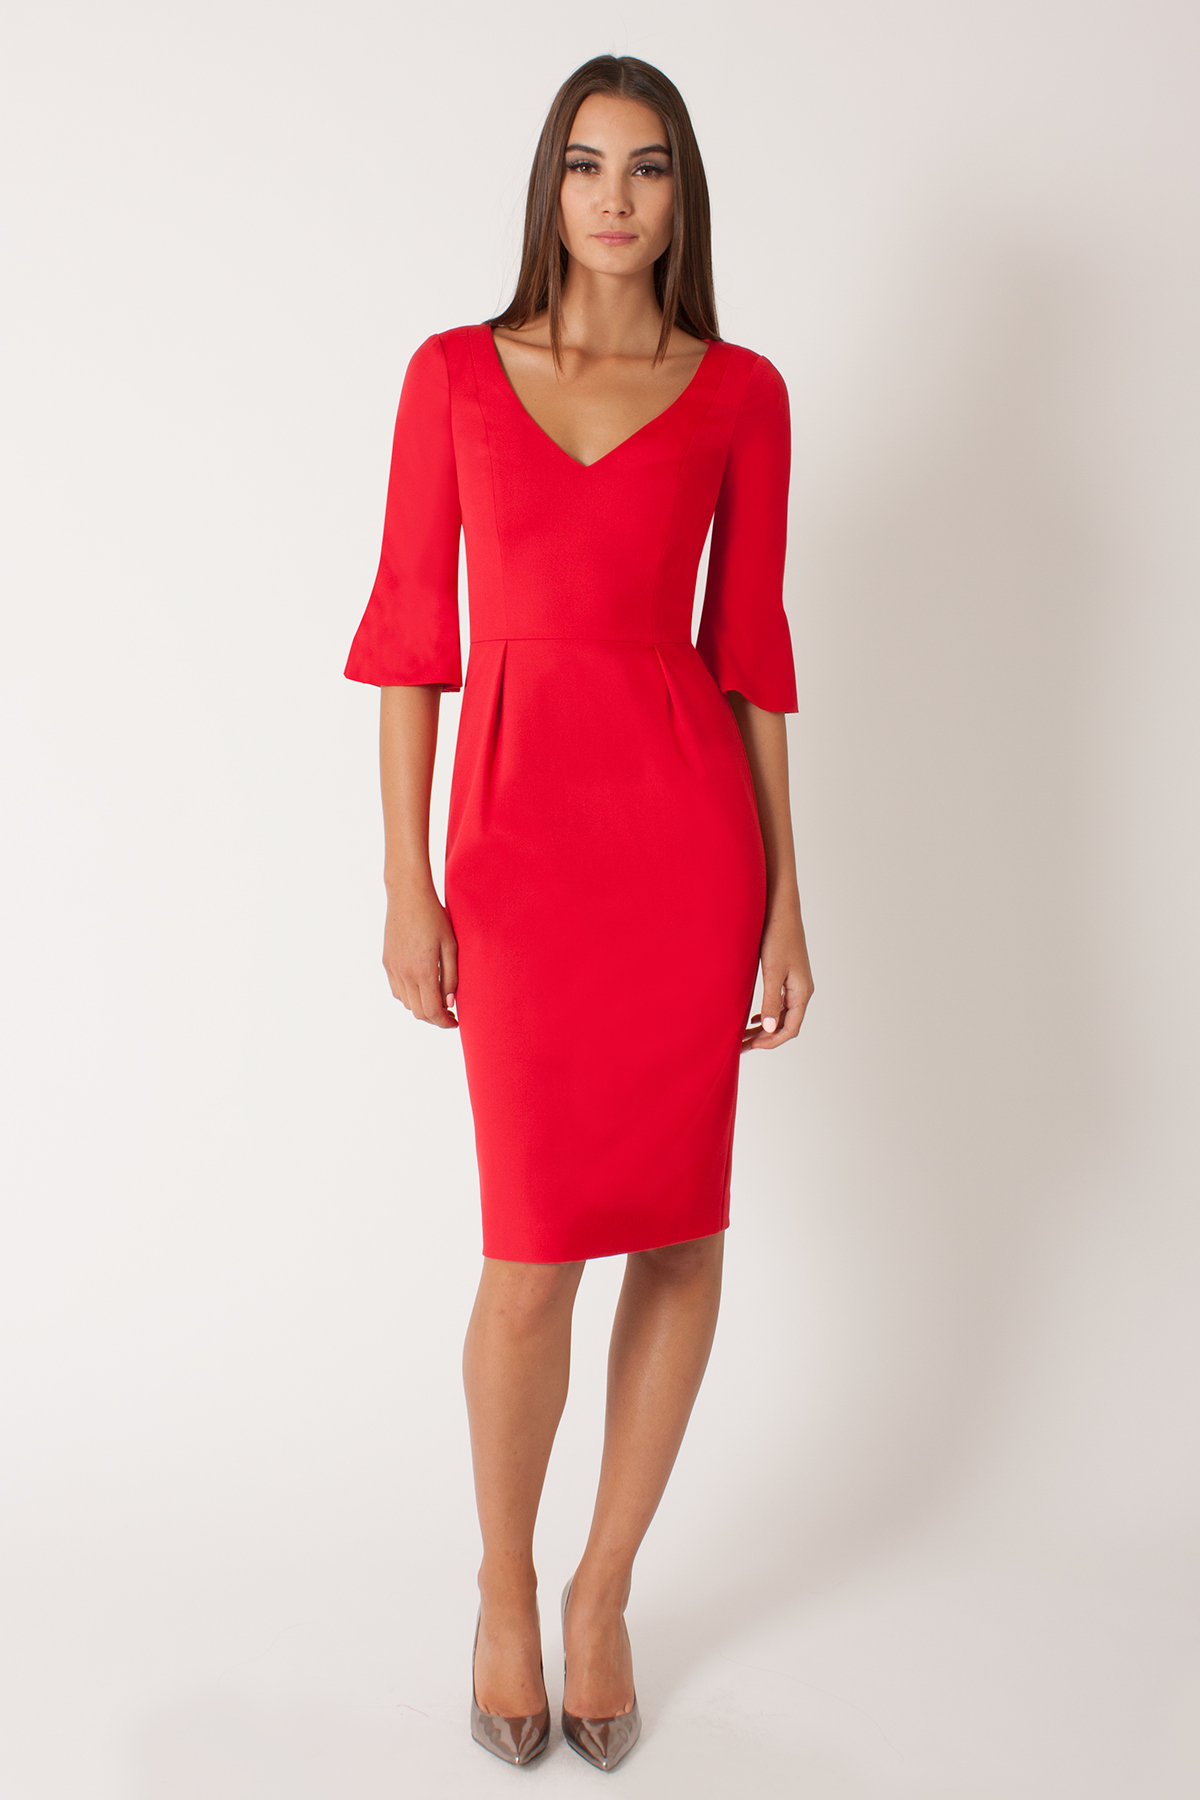 Lyst - Black Halo Adrienne Sheath Dress In Chic Red in Red